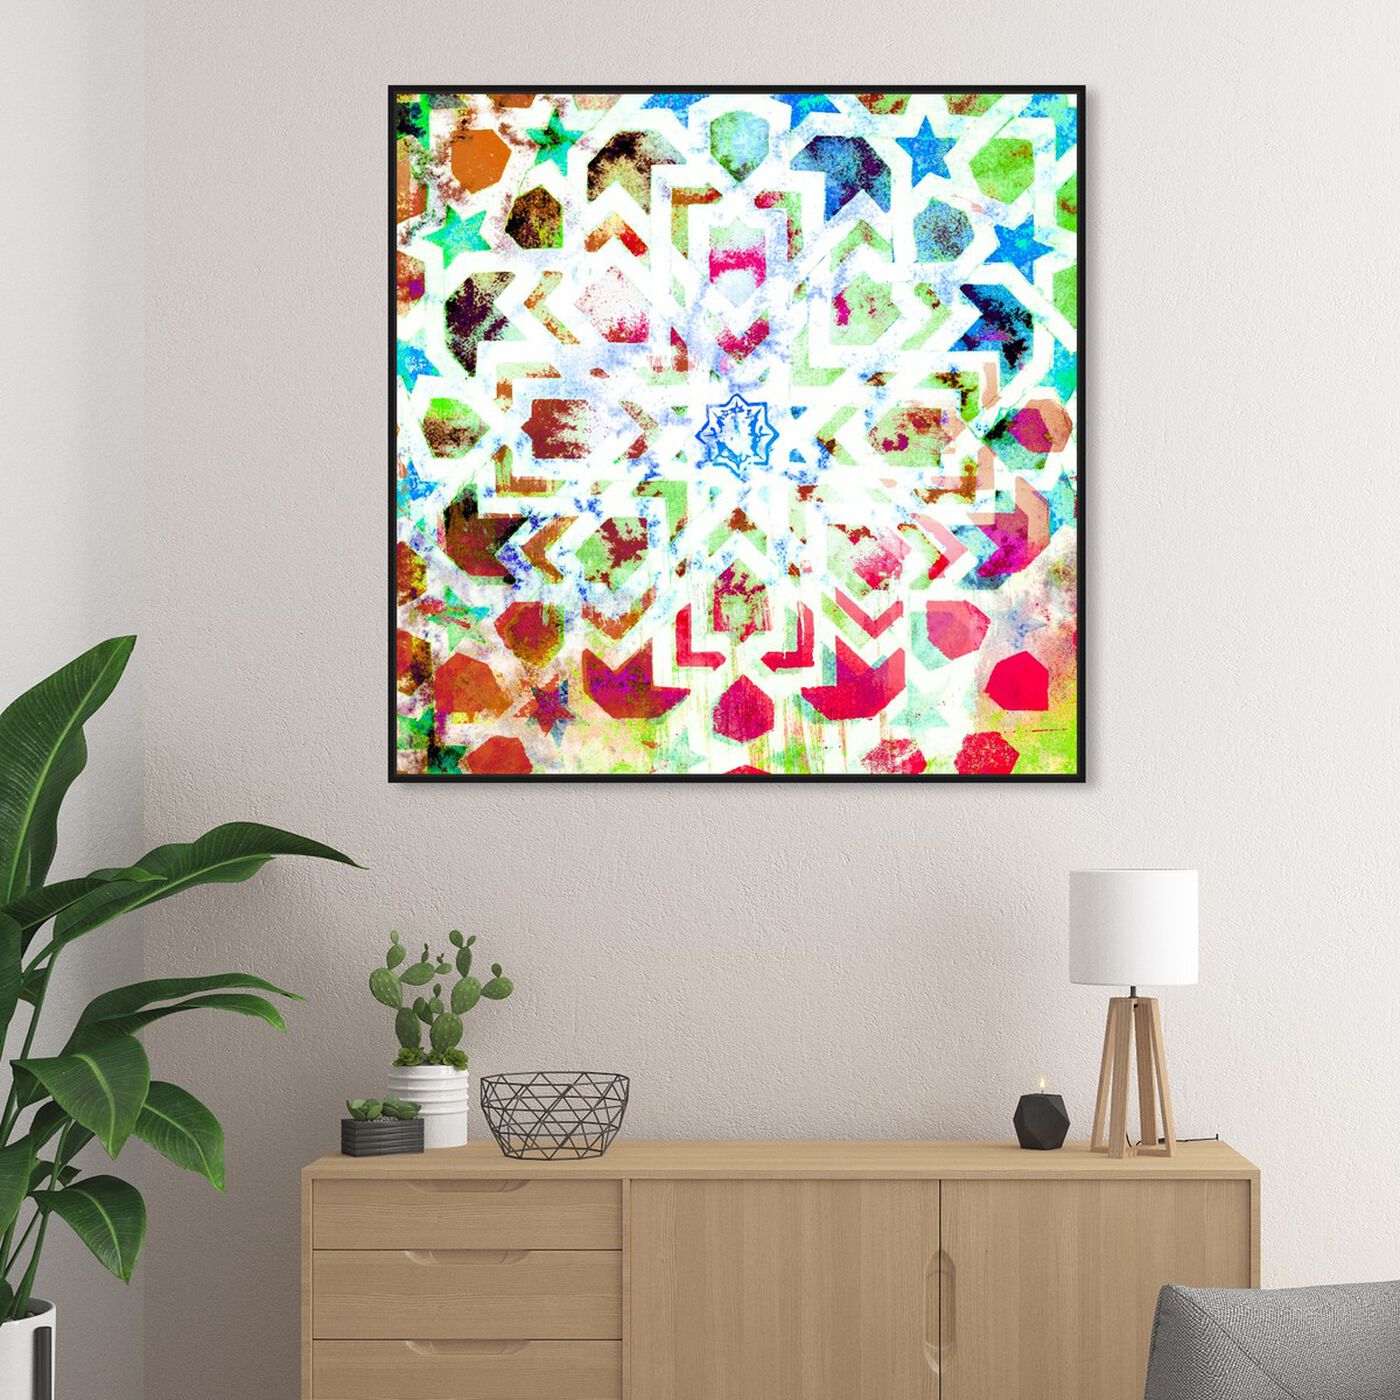 Hanging view of Minat featuring abstract and shapes art.